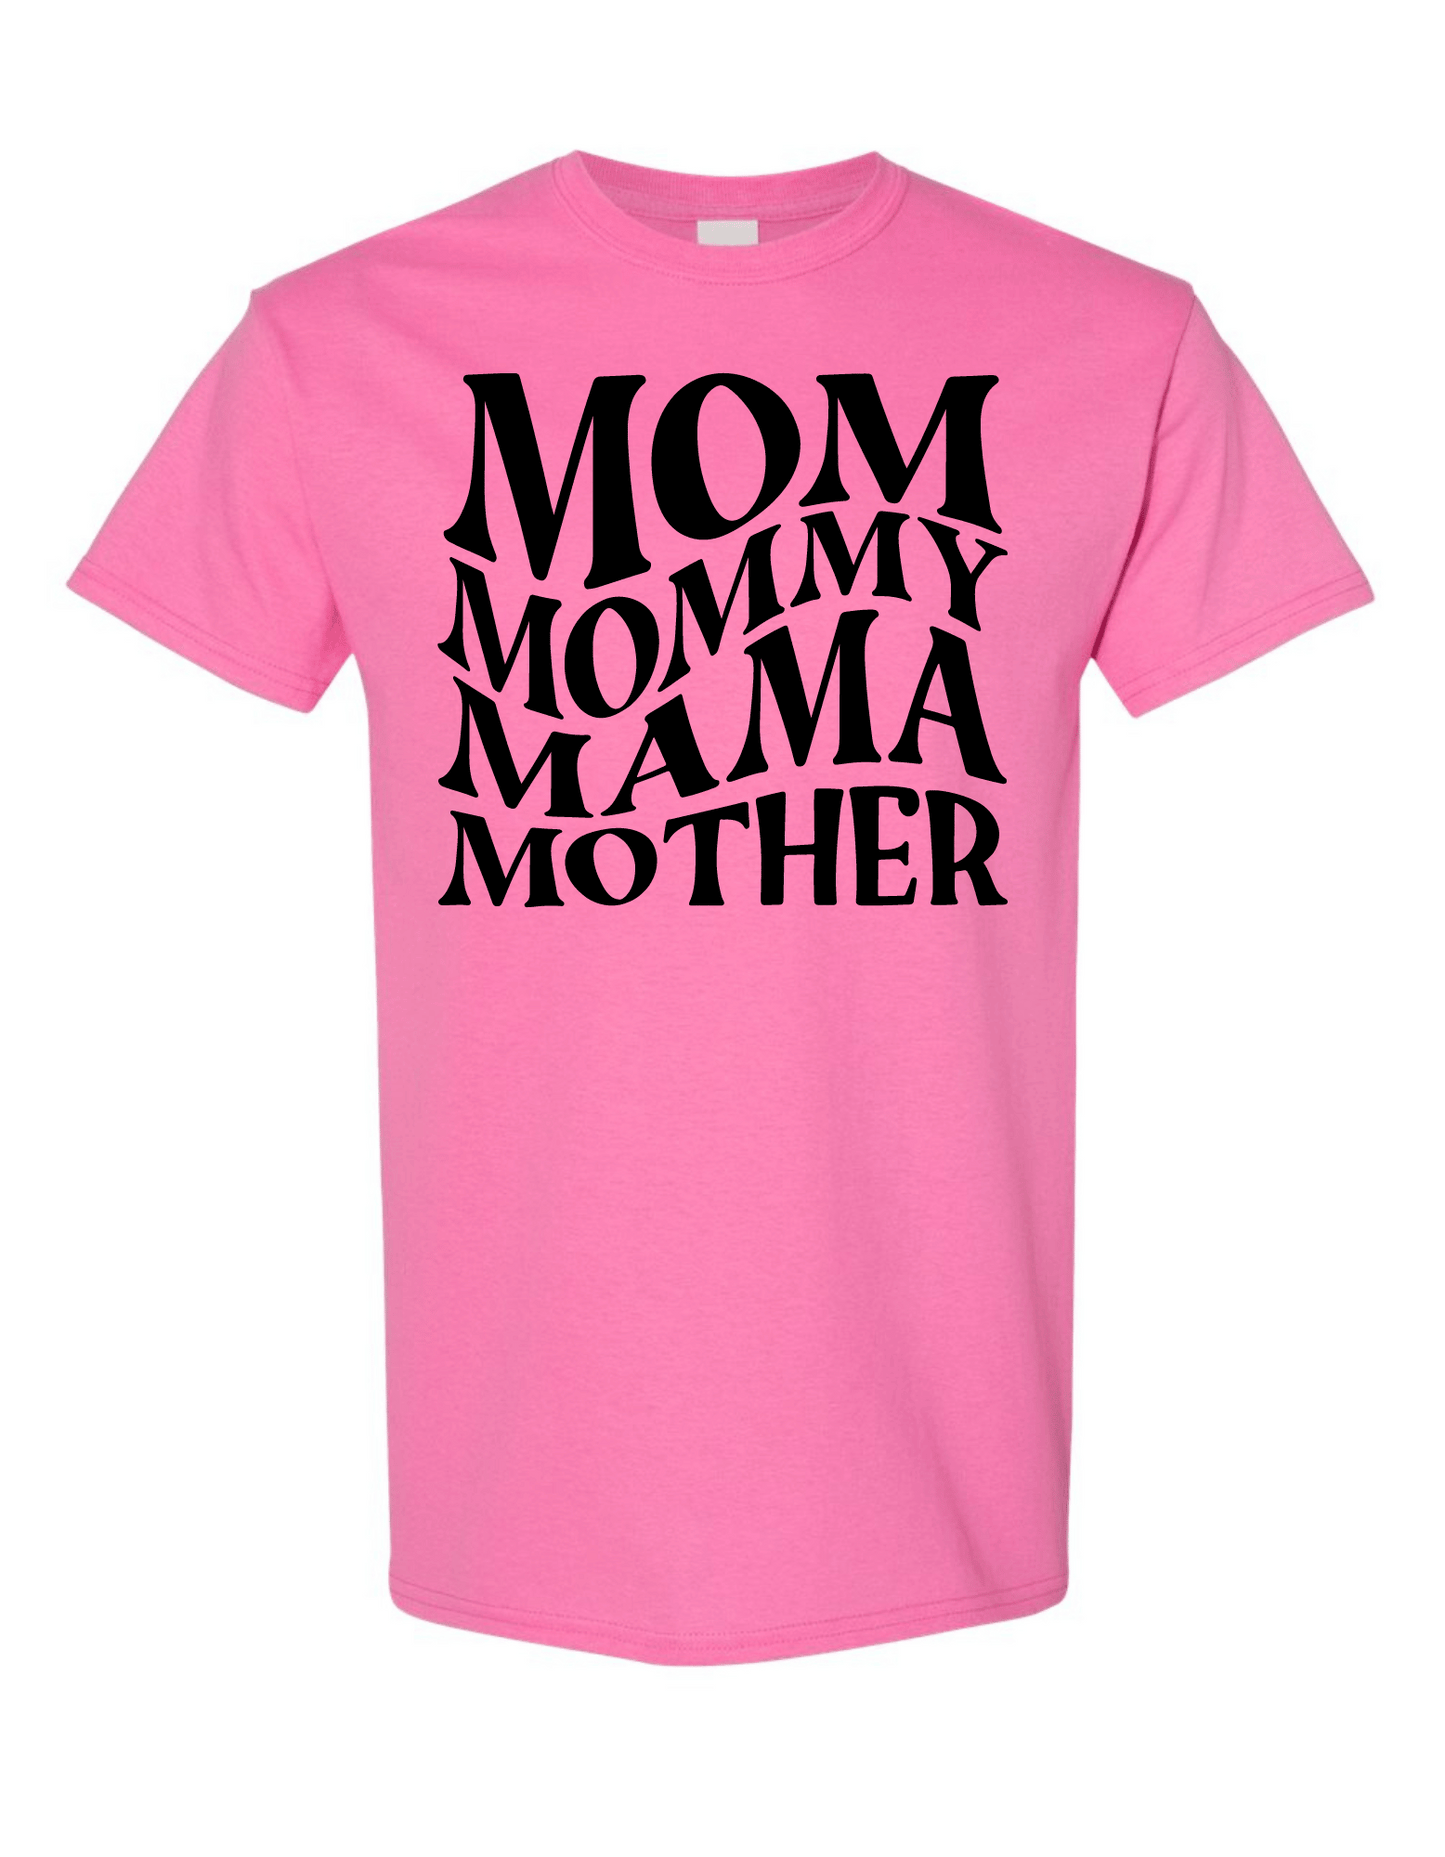 Made to Order Handmade Mom, Mommy, Mama, Mother Mother's Day Short Sleeve Shirt